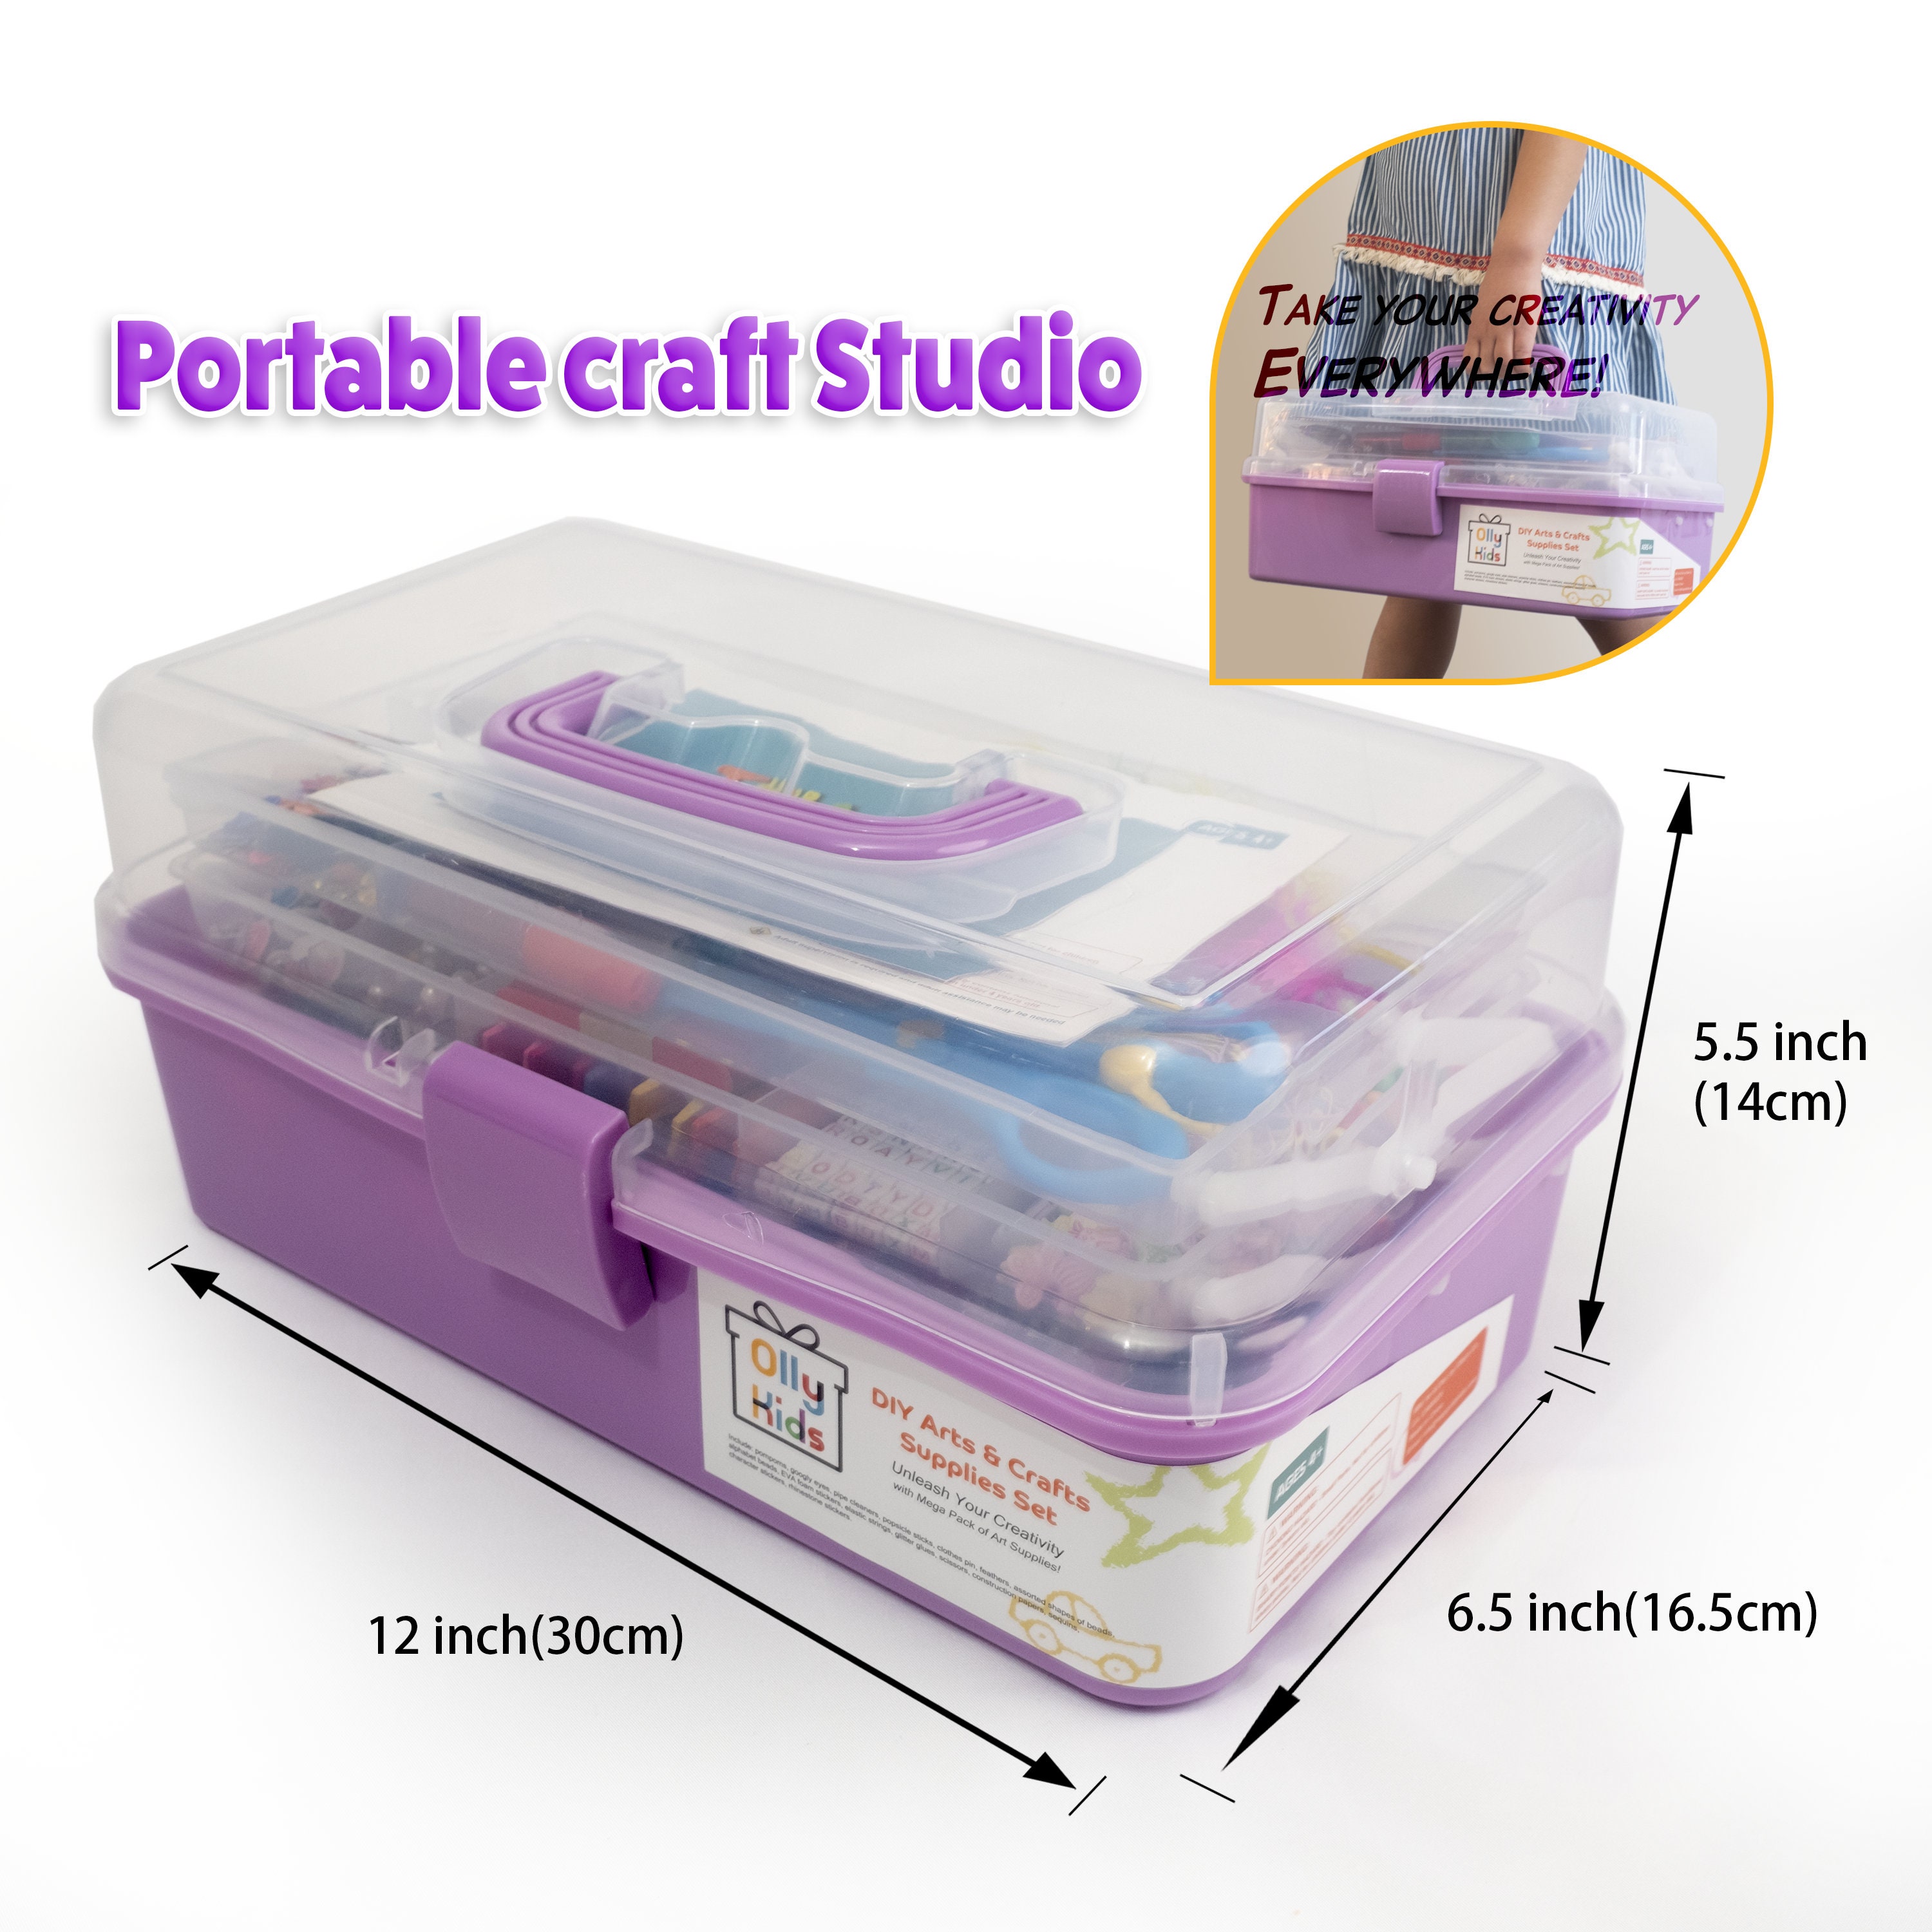 Ultimate Arts and Crafts Supplies Set 1000 Pieces Craft Gift Box for Kids:  DIY Craft Supply for Kids, Girls, and Boys. 